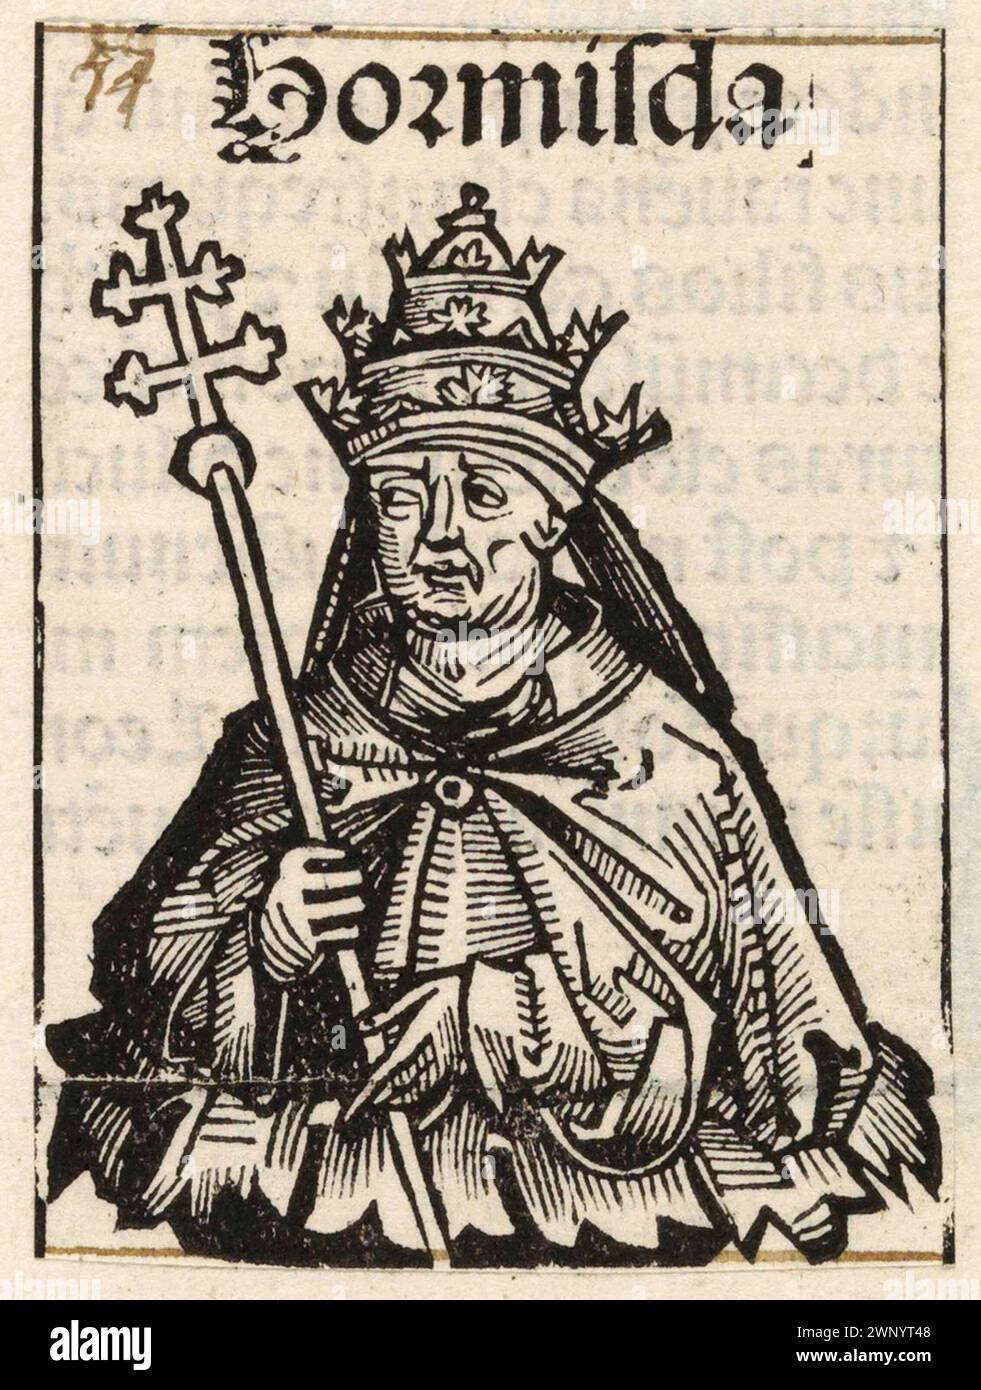 A 15th Century engraving of Pope Hormisdas (also written Ormisdas or Hormisda) who was pontiff from AD514 to AD523. He was the 52nd pope. Stock Photo